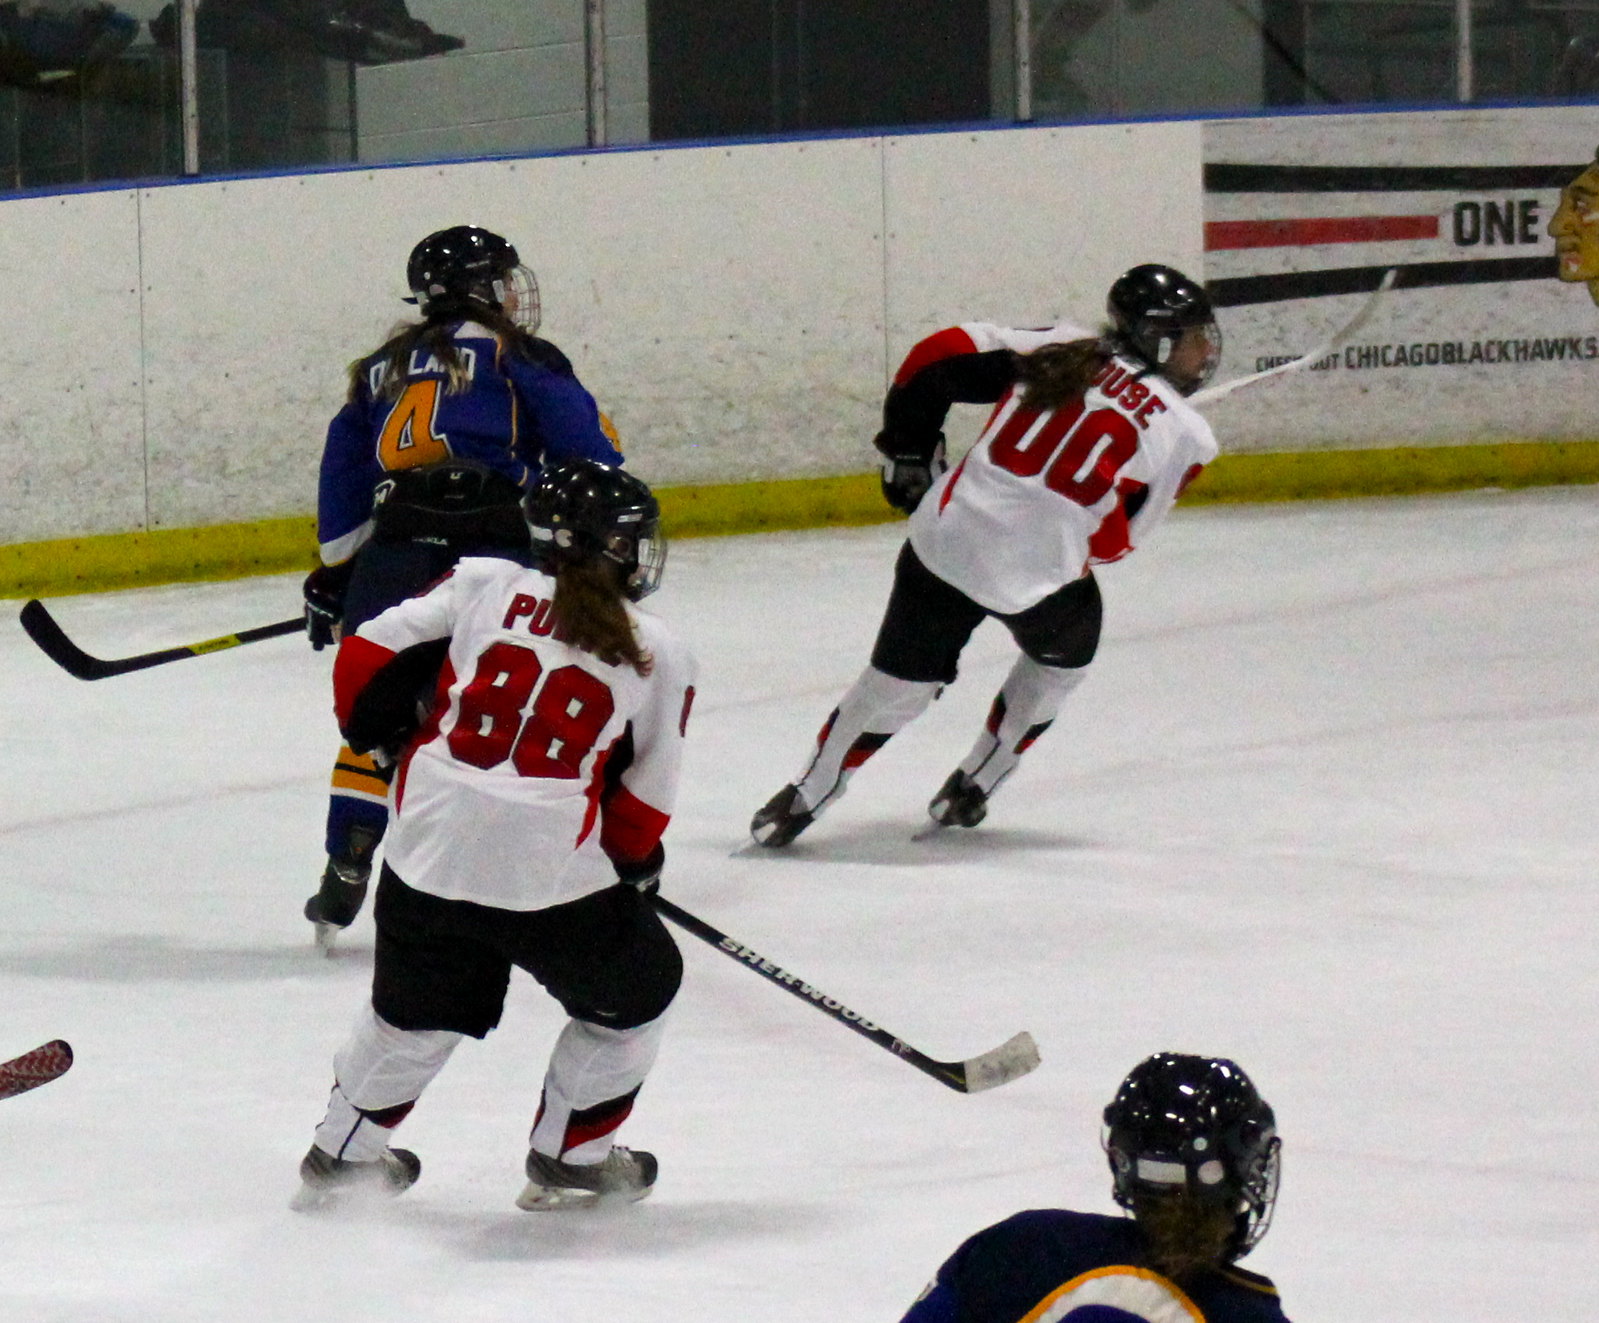 The Chicago Fury U14 AAA girls hockey team vs St. Louis Lady Blues at Arctic Ice Arena in Orland ...